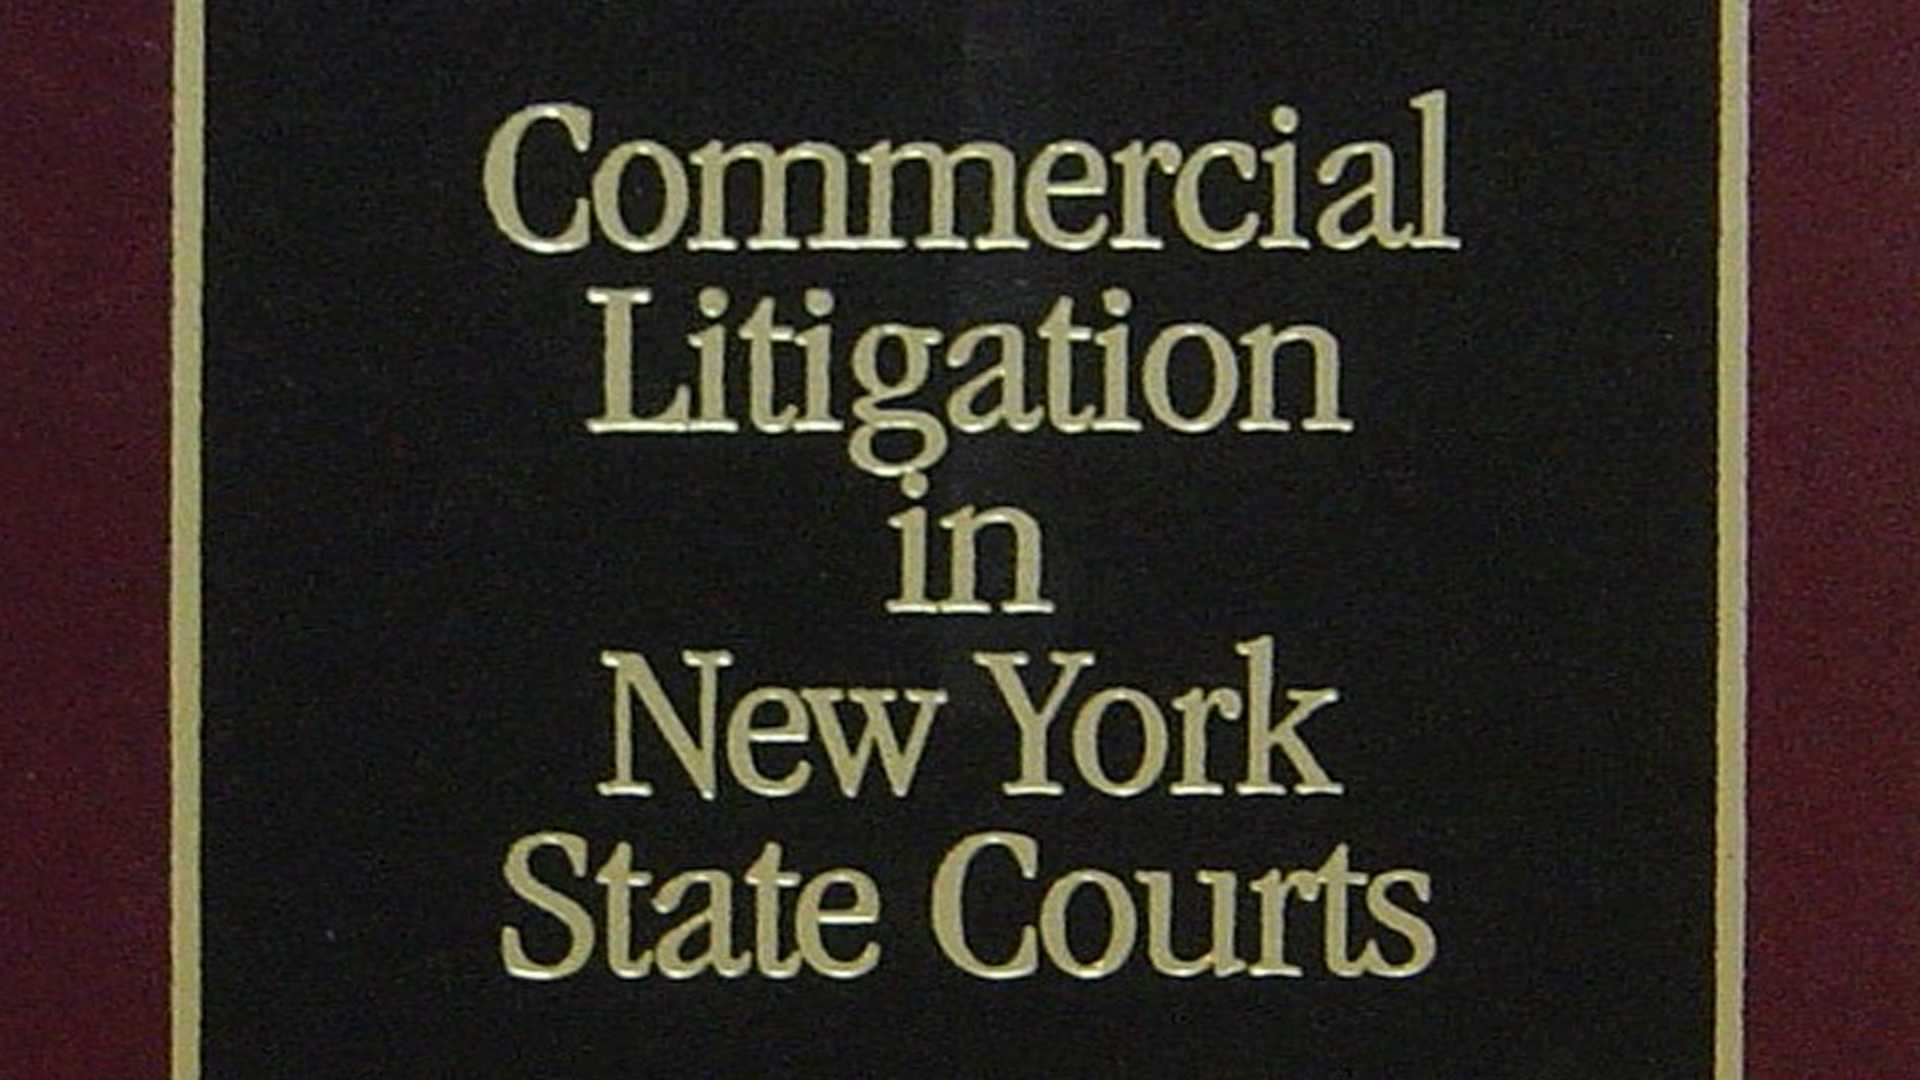 Featured Images: Commercial Litigation in New York State Courts 3rd Edition